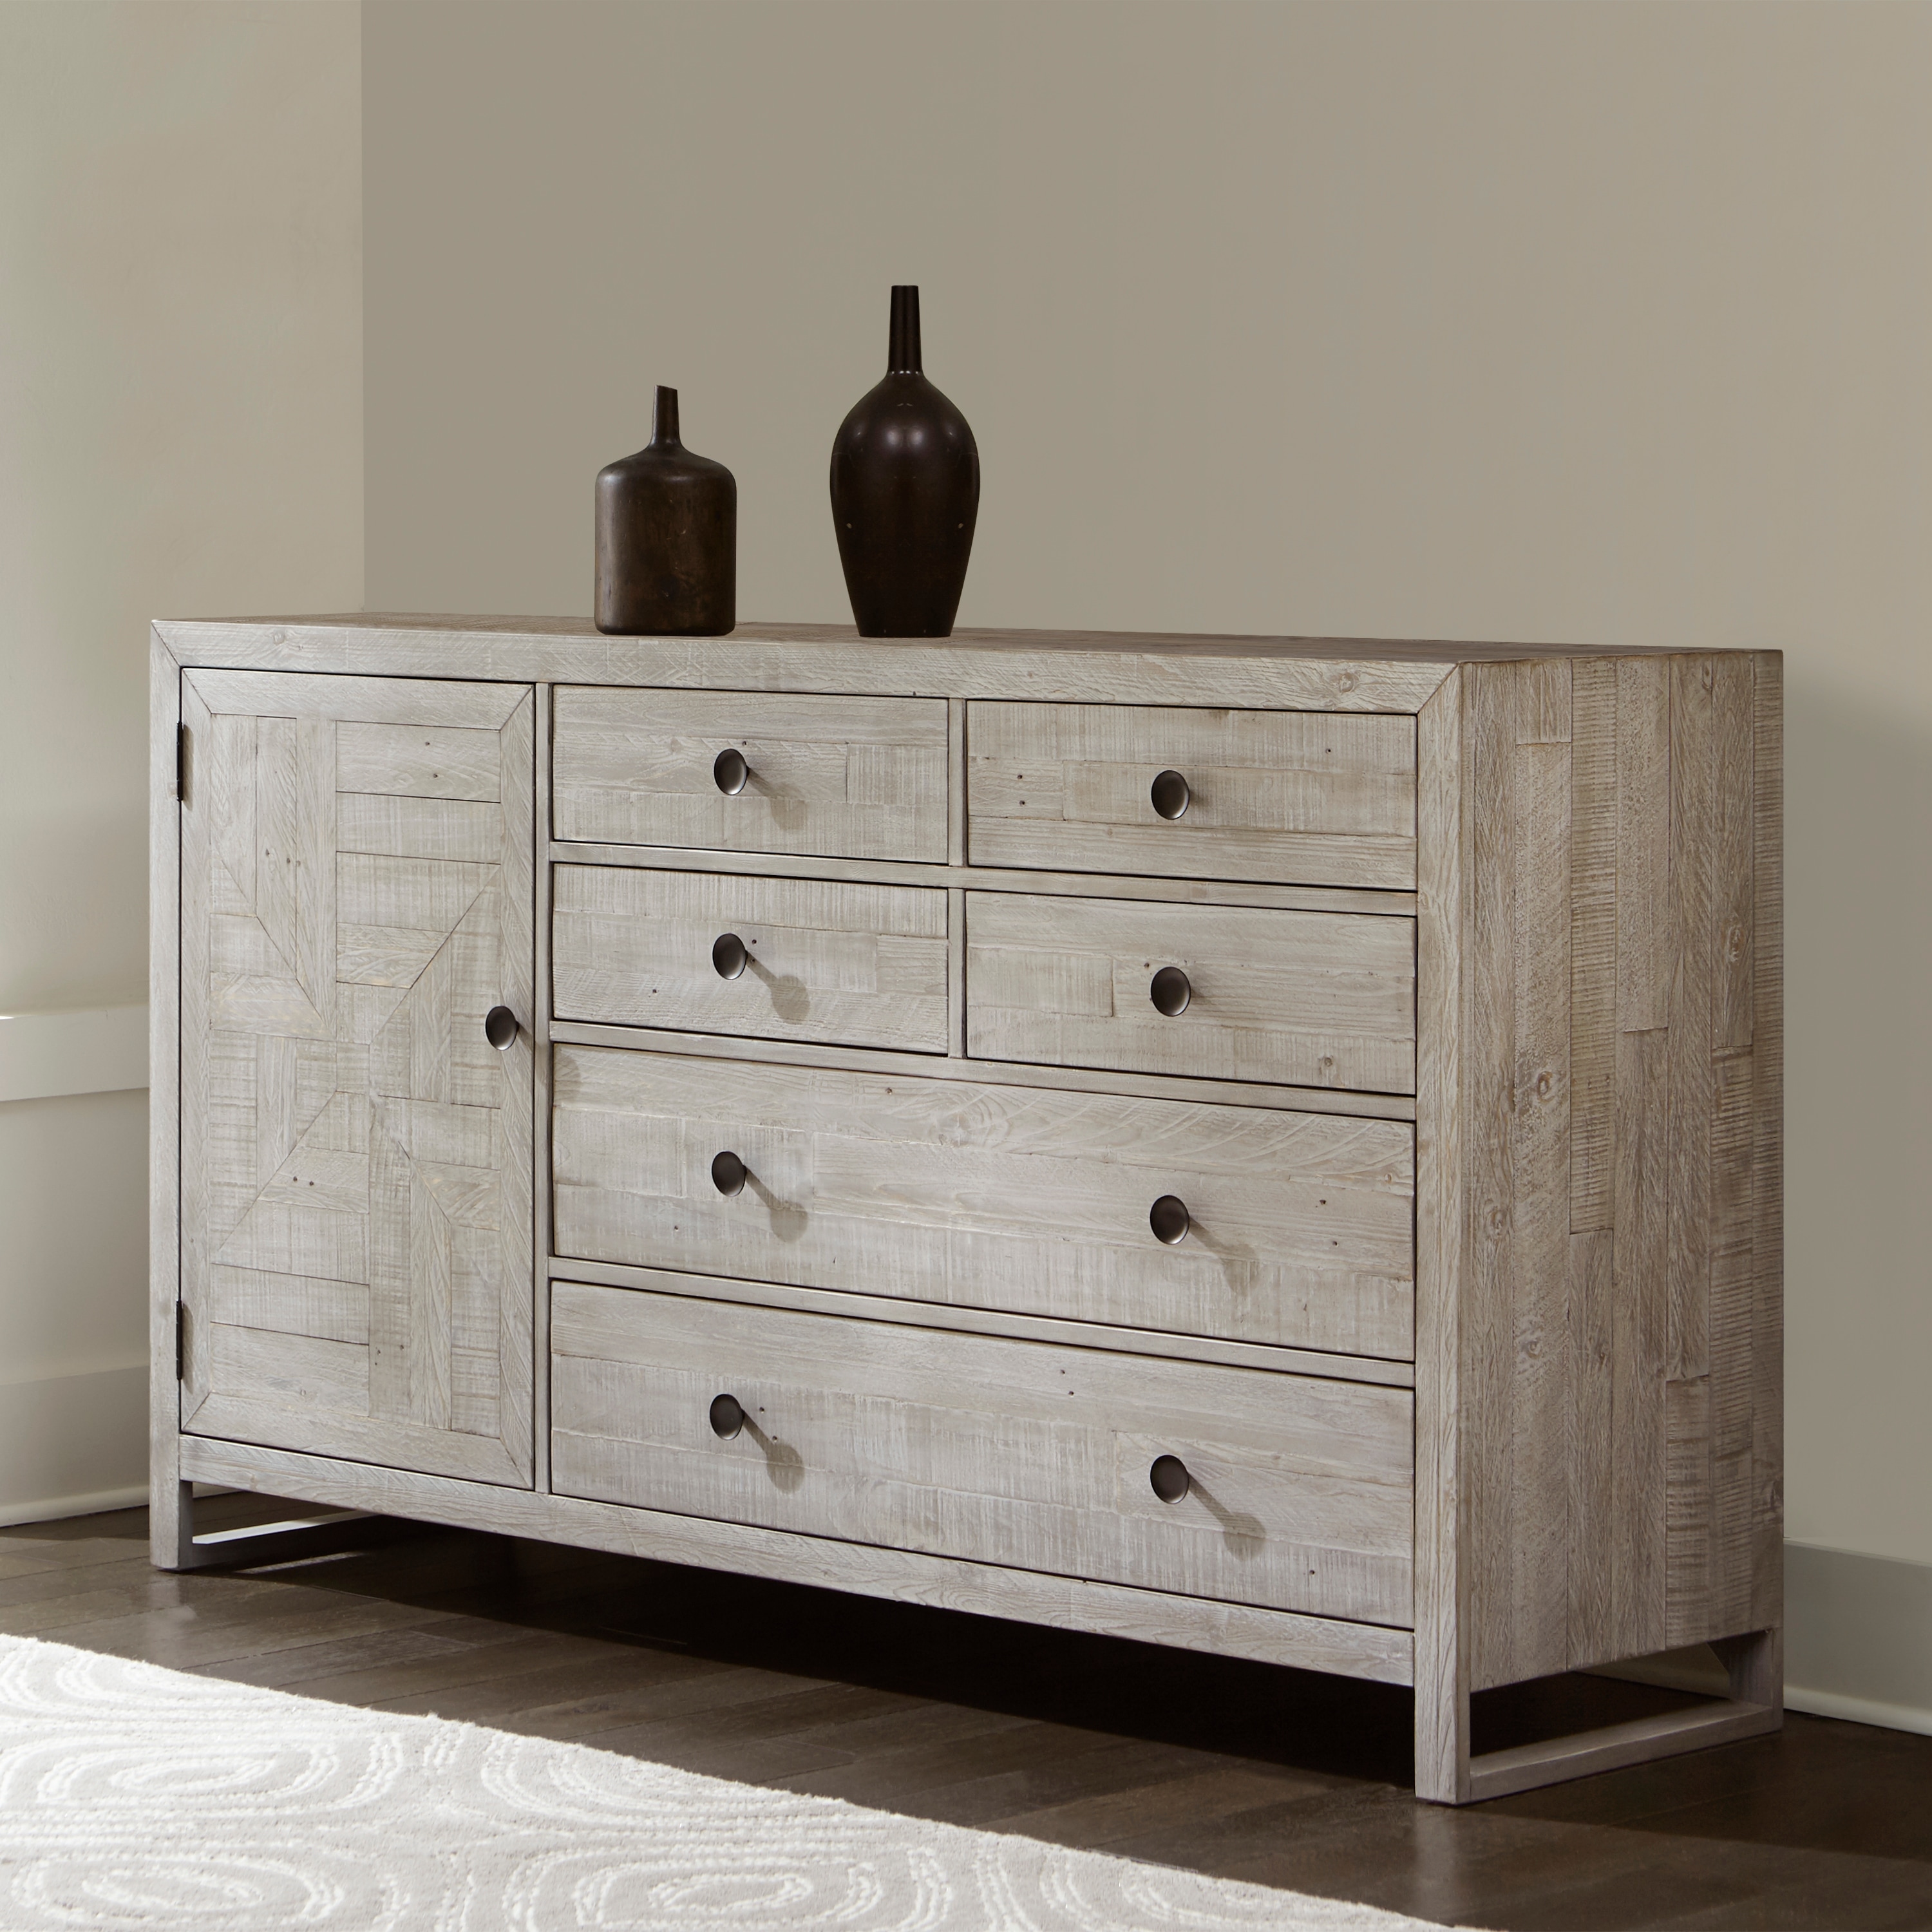 https://ak1.ostkcdn.com/images/products/is/images/direct/ddb8d03f9dbdb11106792e8835f4624d7974a95a/Studio-20-Drawer-Dresser-by-Palmetto-Home.jpg